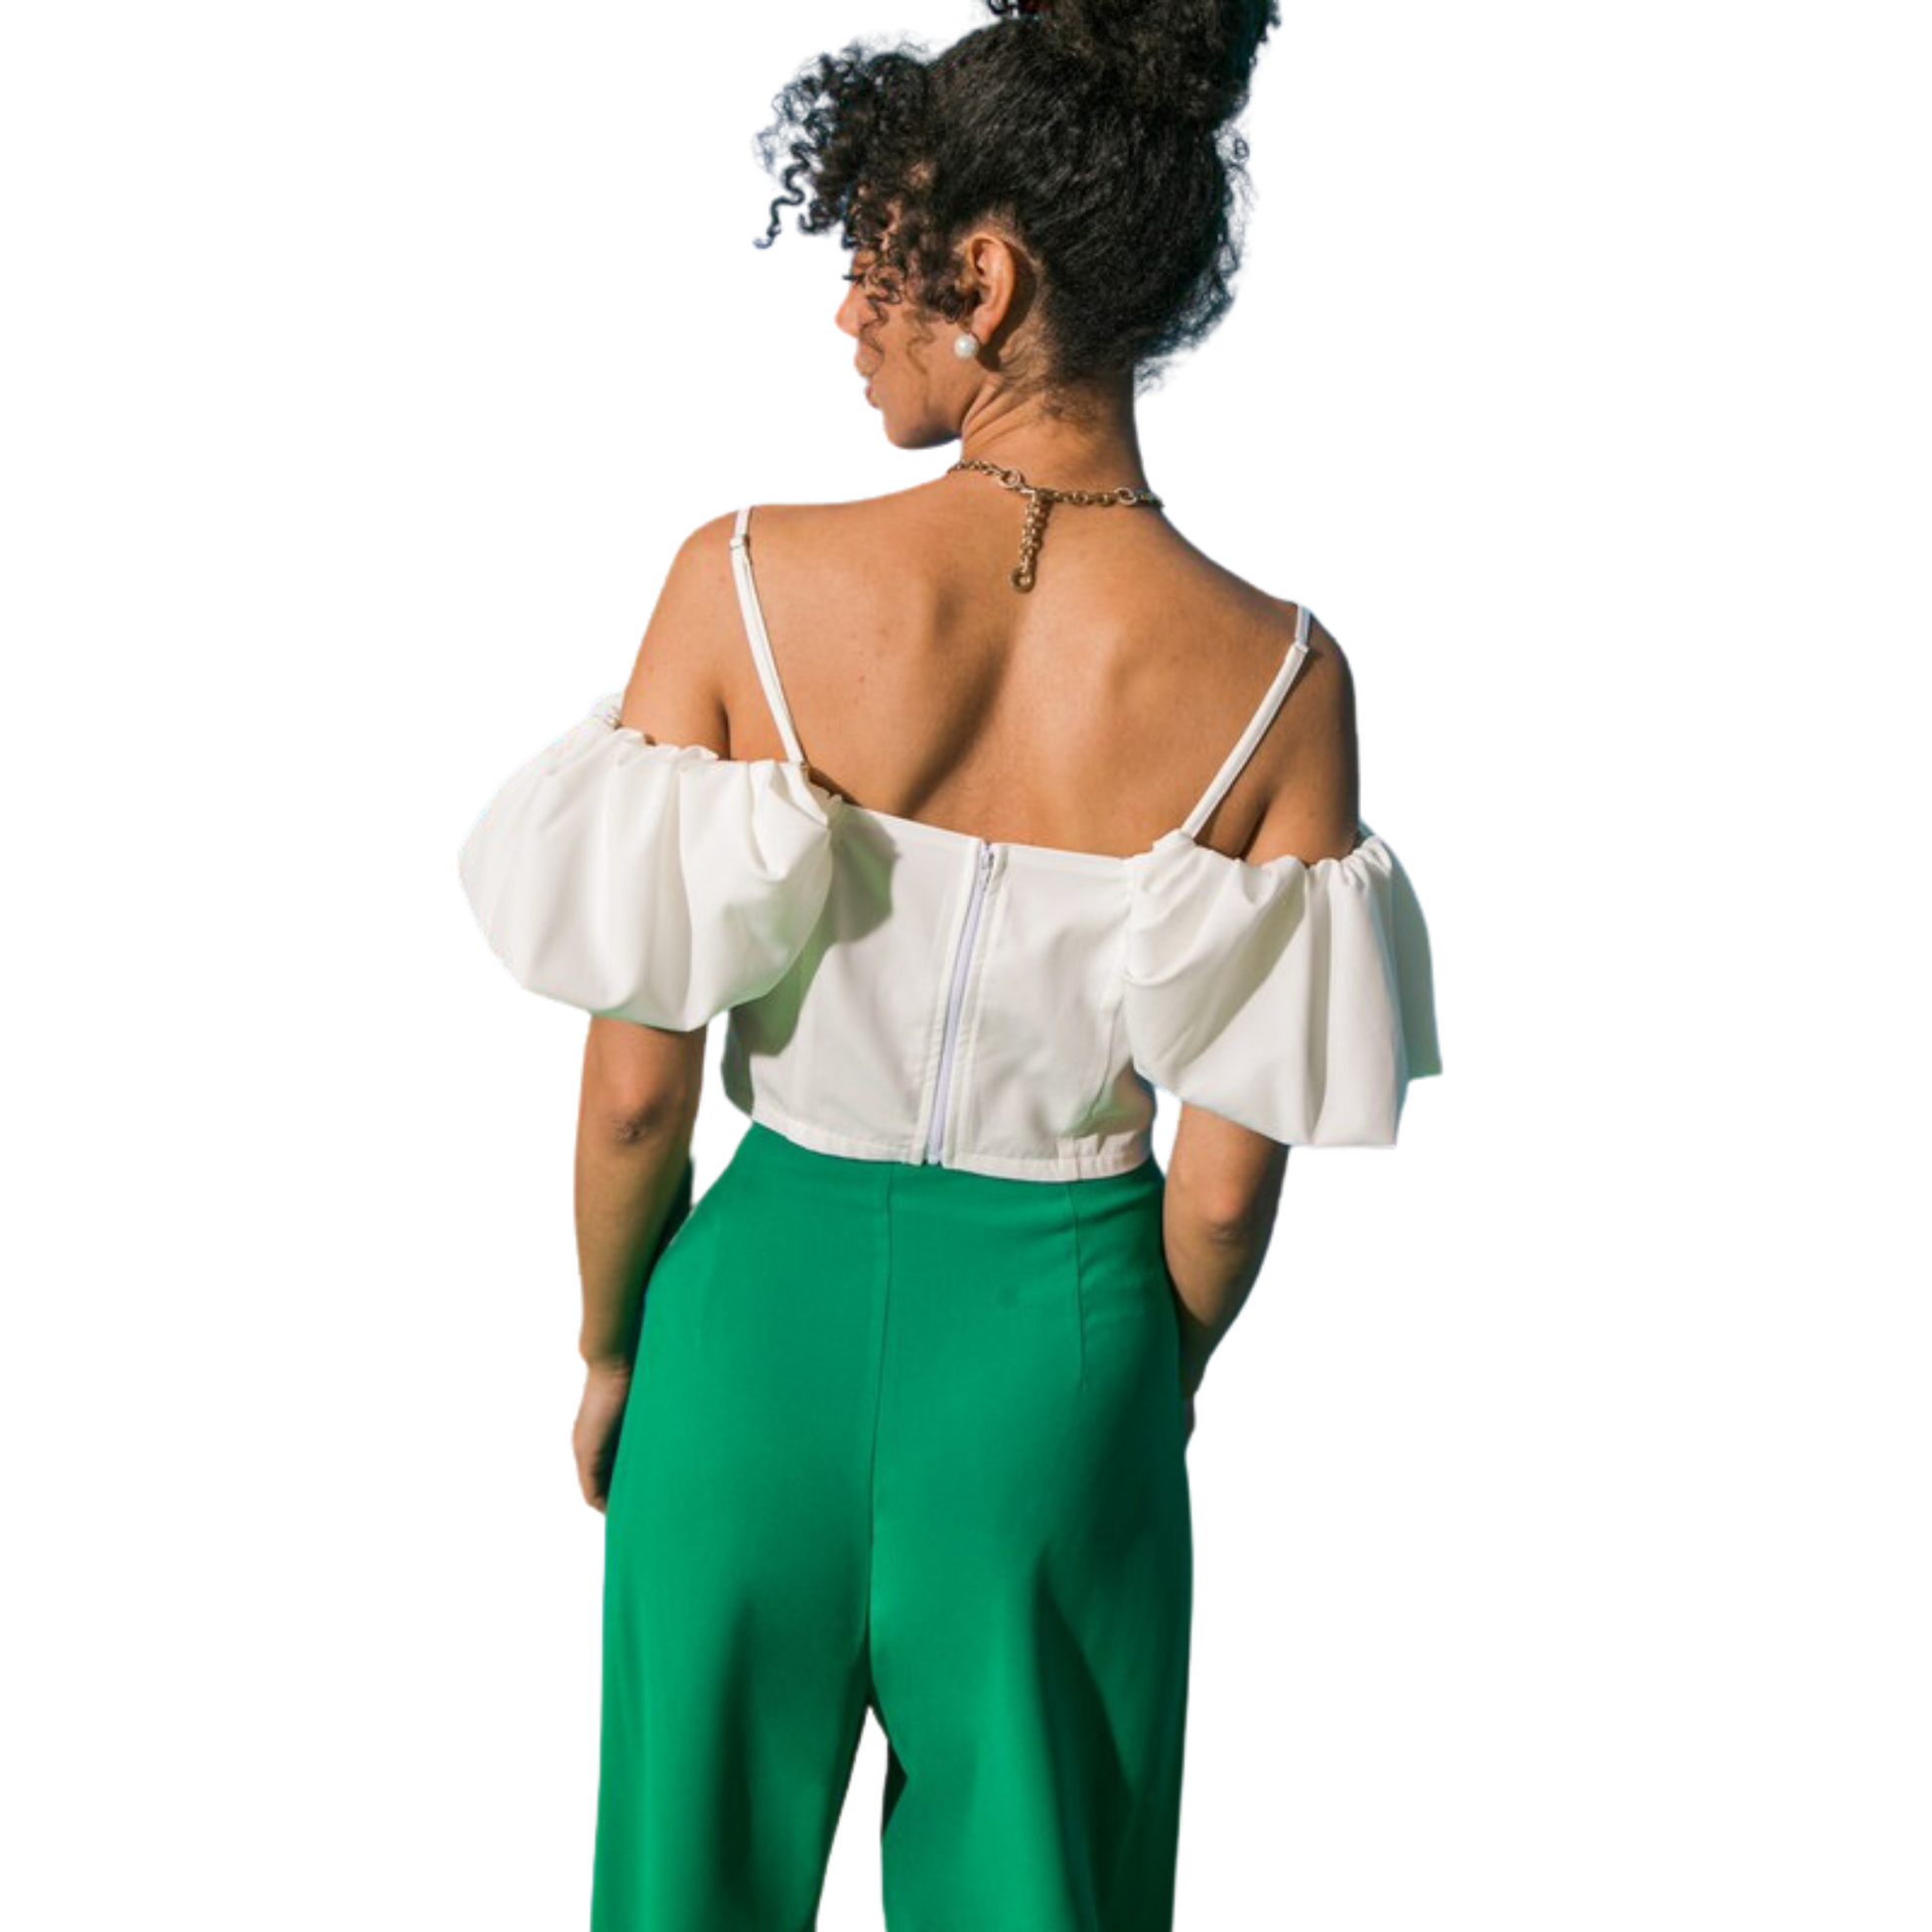 This white cold shoulder top is the perfect way to add a touch of graceful femininity to your look. The delicate ruffle detail provides an added flair and the cropped cut creates a flattering silhouette.